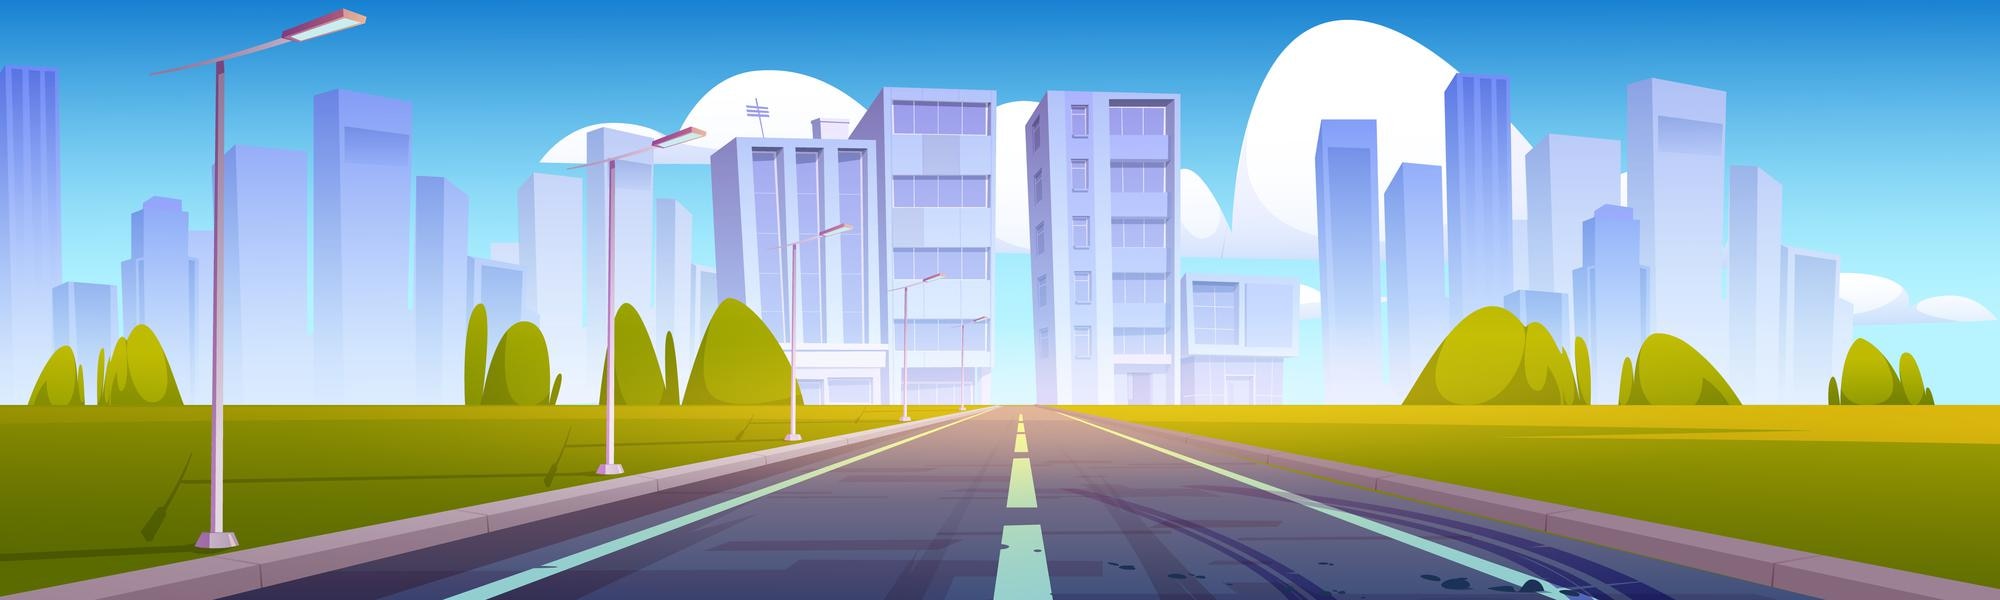 Free Vector | Road to city with buildings and skyscrapers on skyline.  vector cartoon illustration of summer landscape with empty highway, street  lights, green grass, trees and modern town on horizon